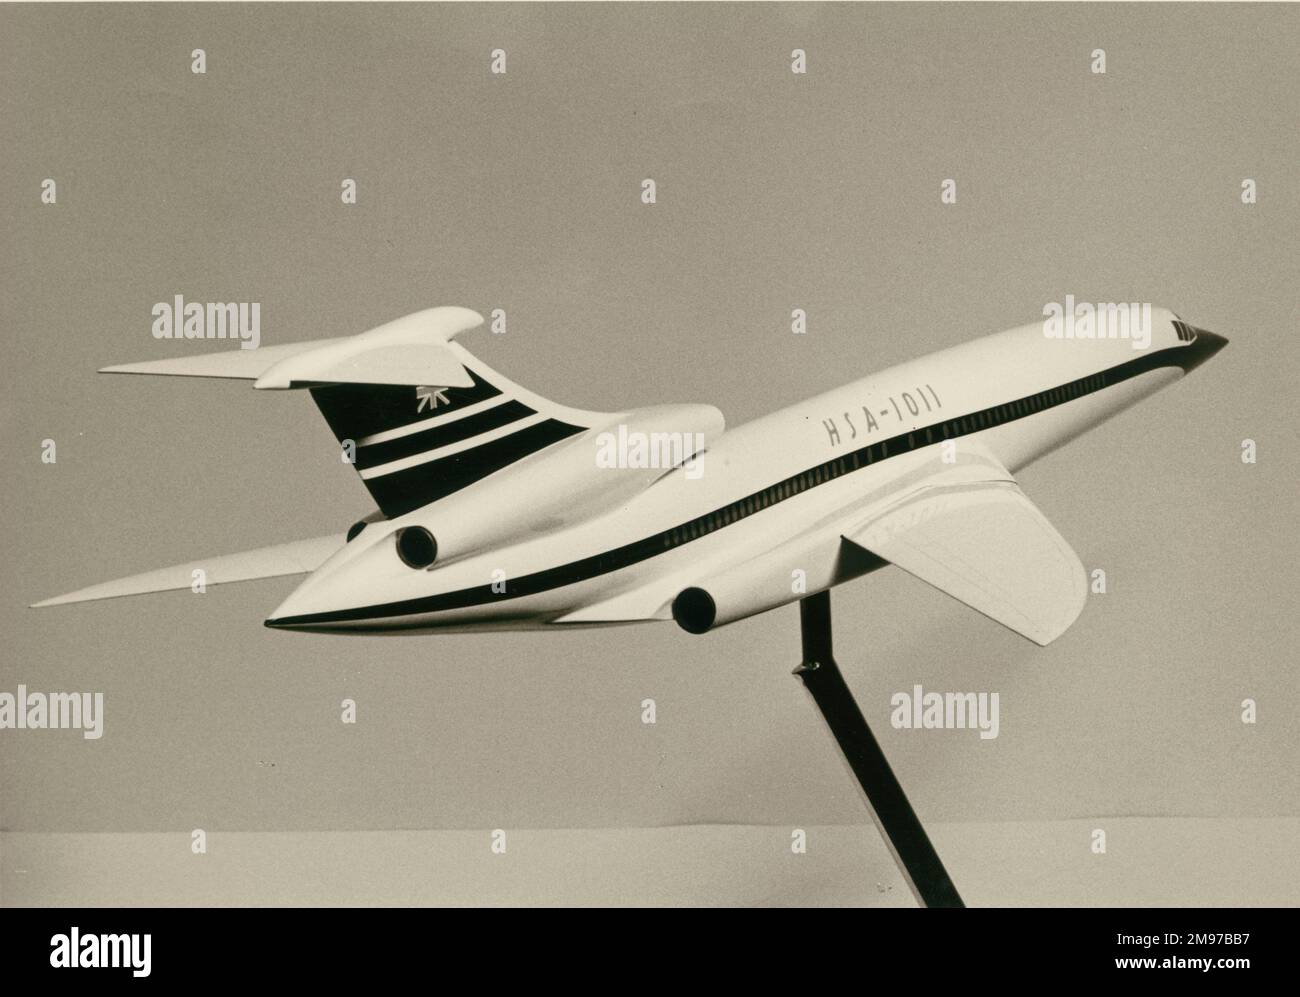 Hawker Siddeley HSA1011 ‘no boom’ supersonic airliner project. Stock Photo